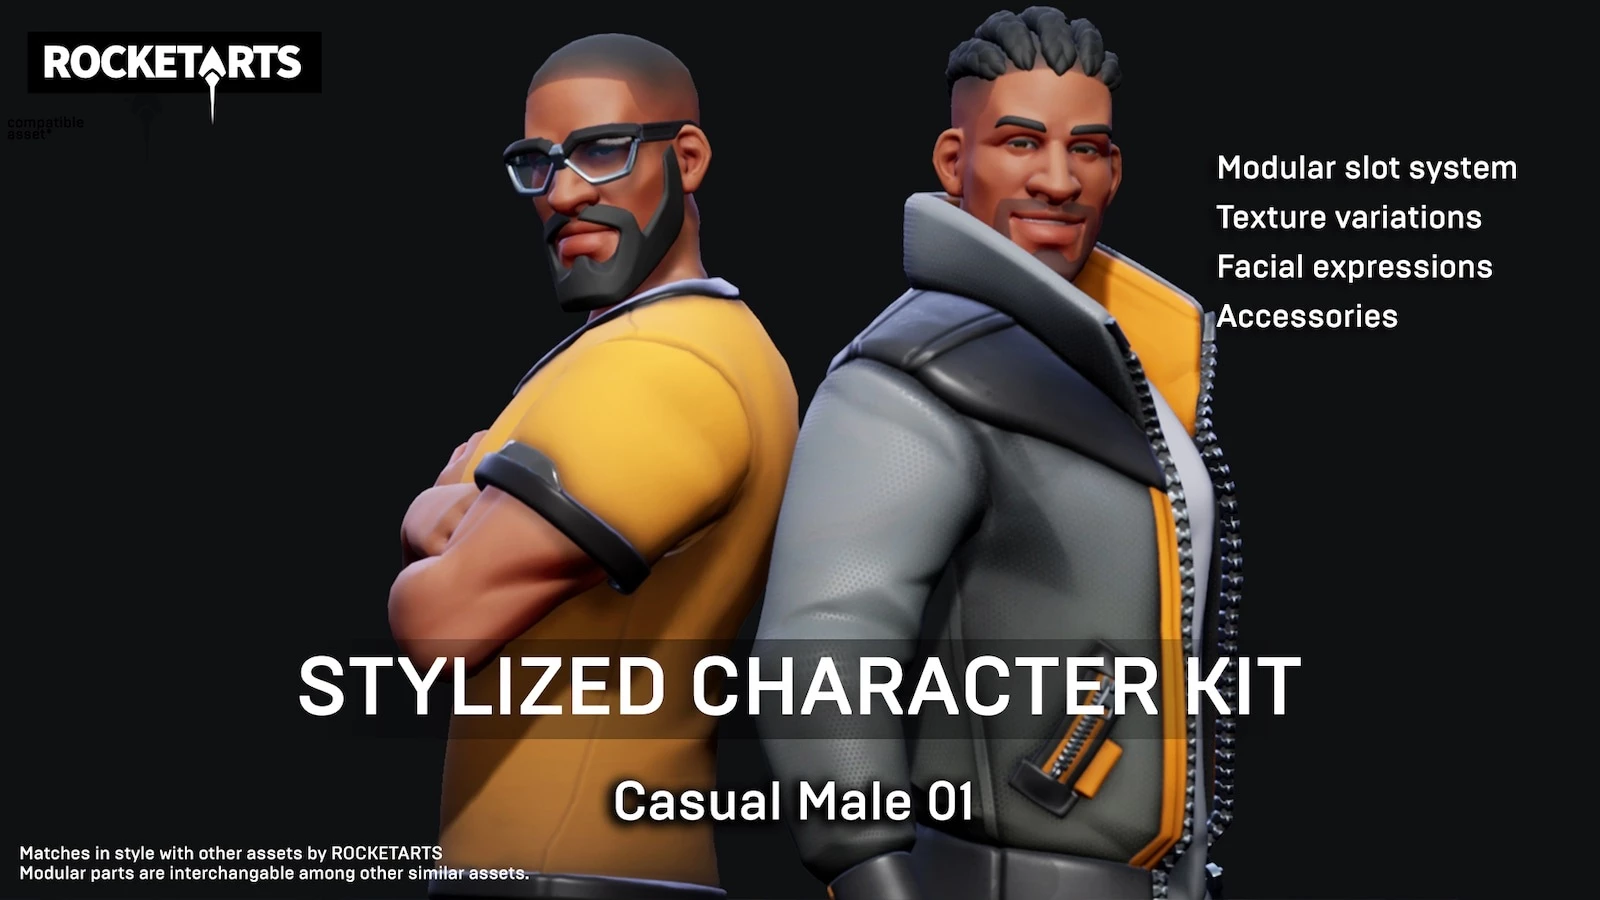 Stylized Character Kit from Unreal Engine Marketplace